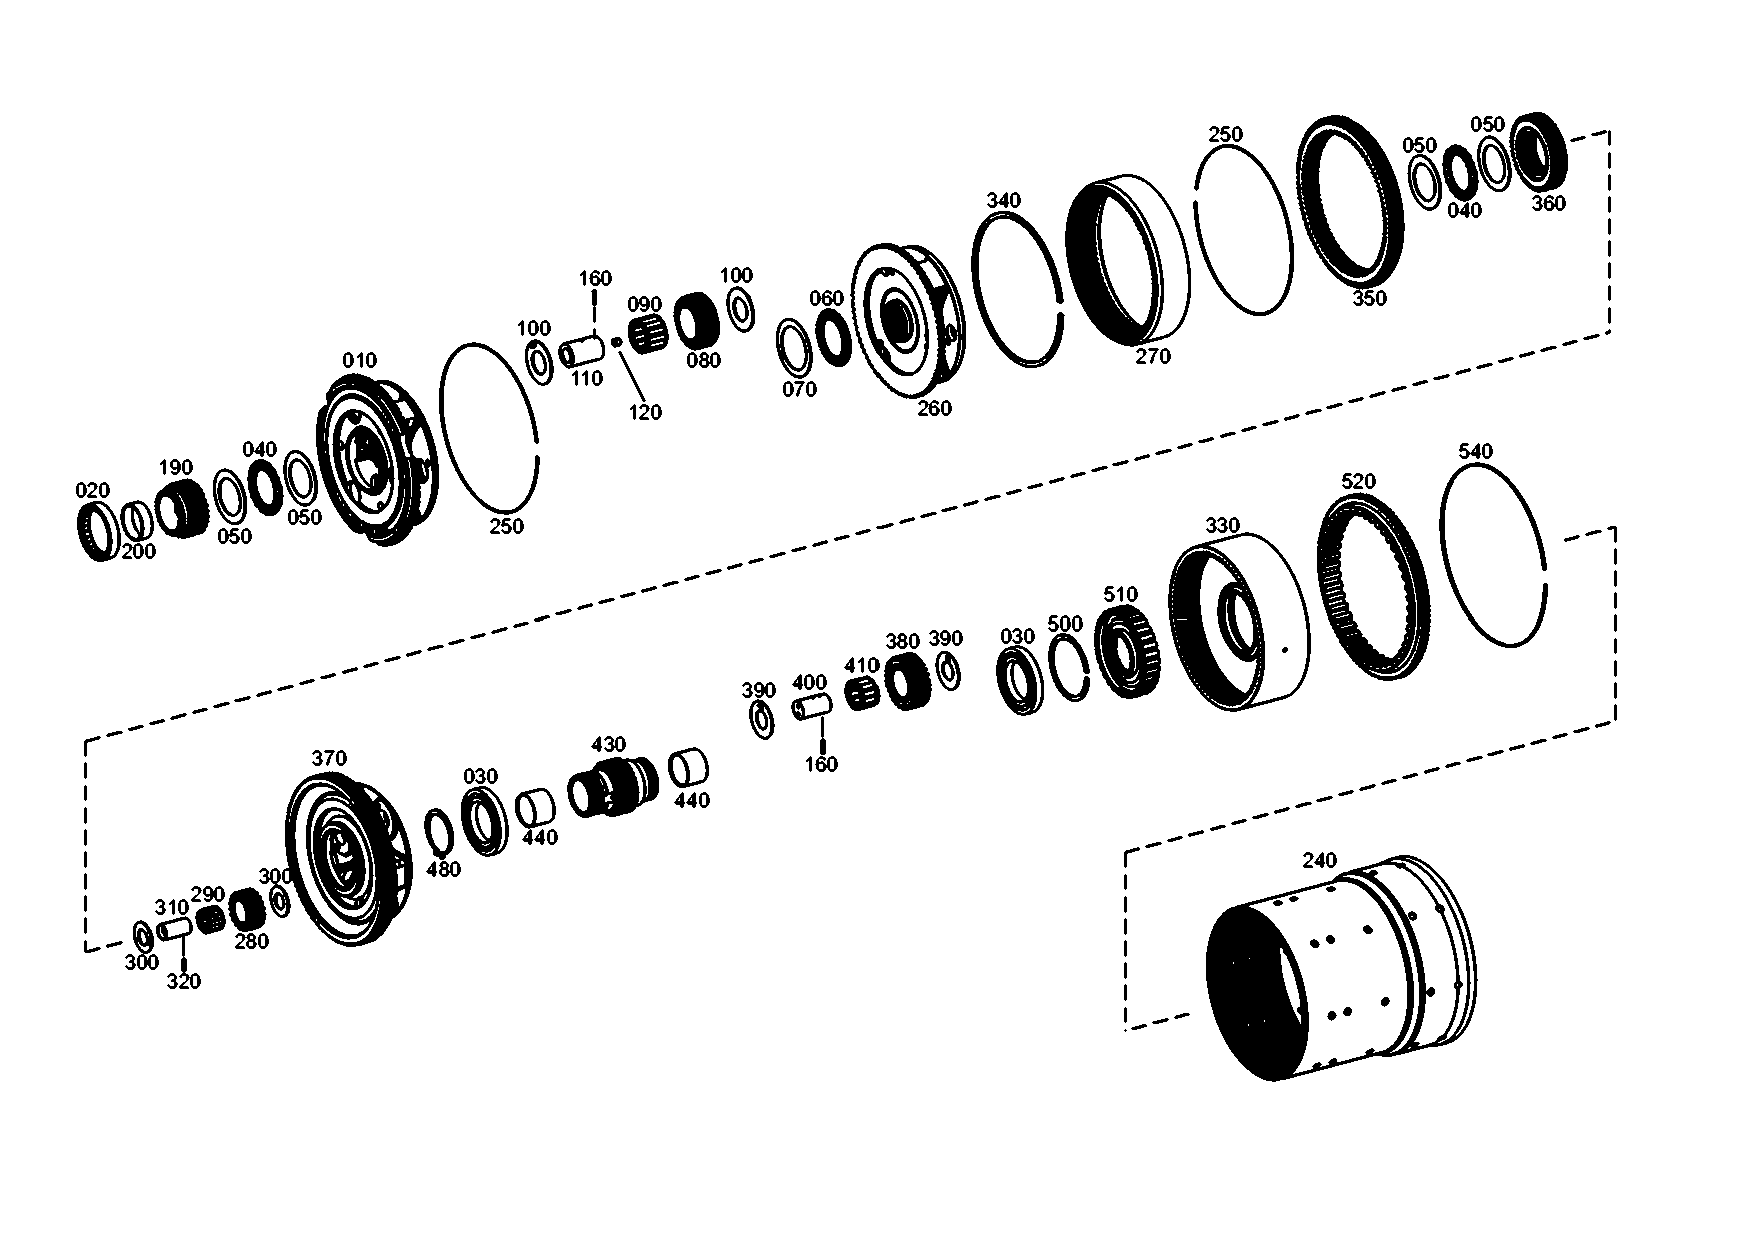 drawing for PPM 09397960 - BALL BEARING (figure 4)